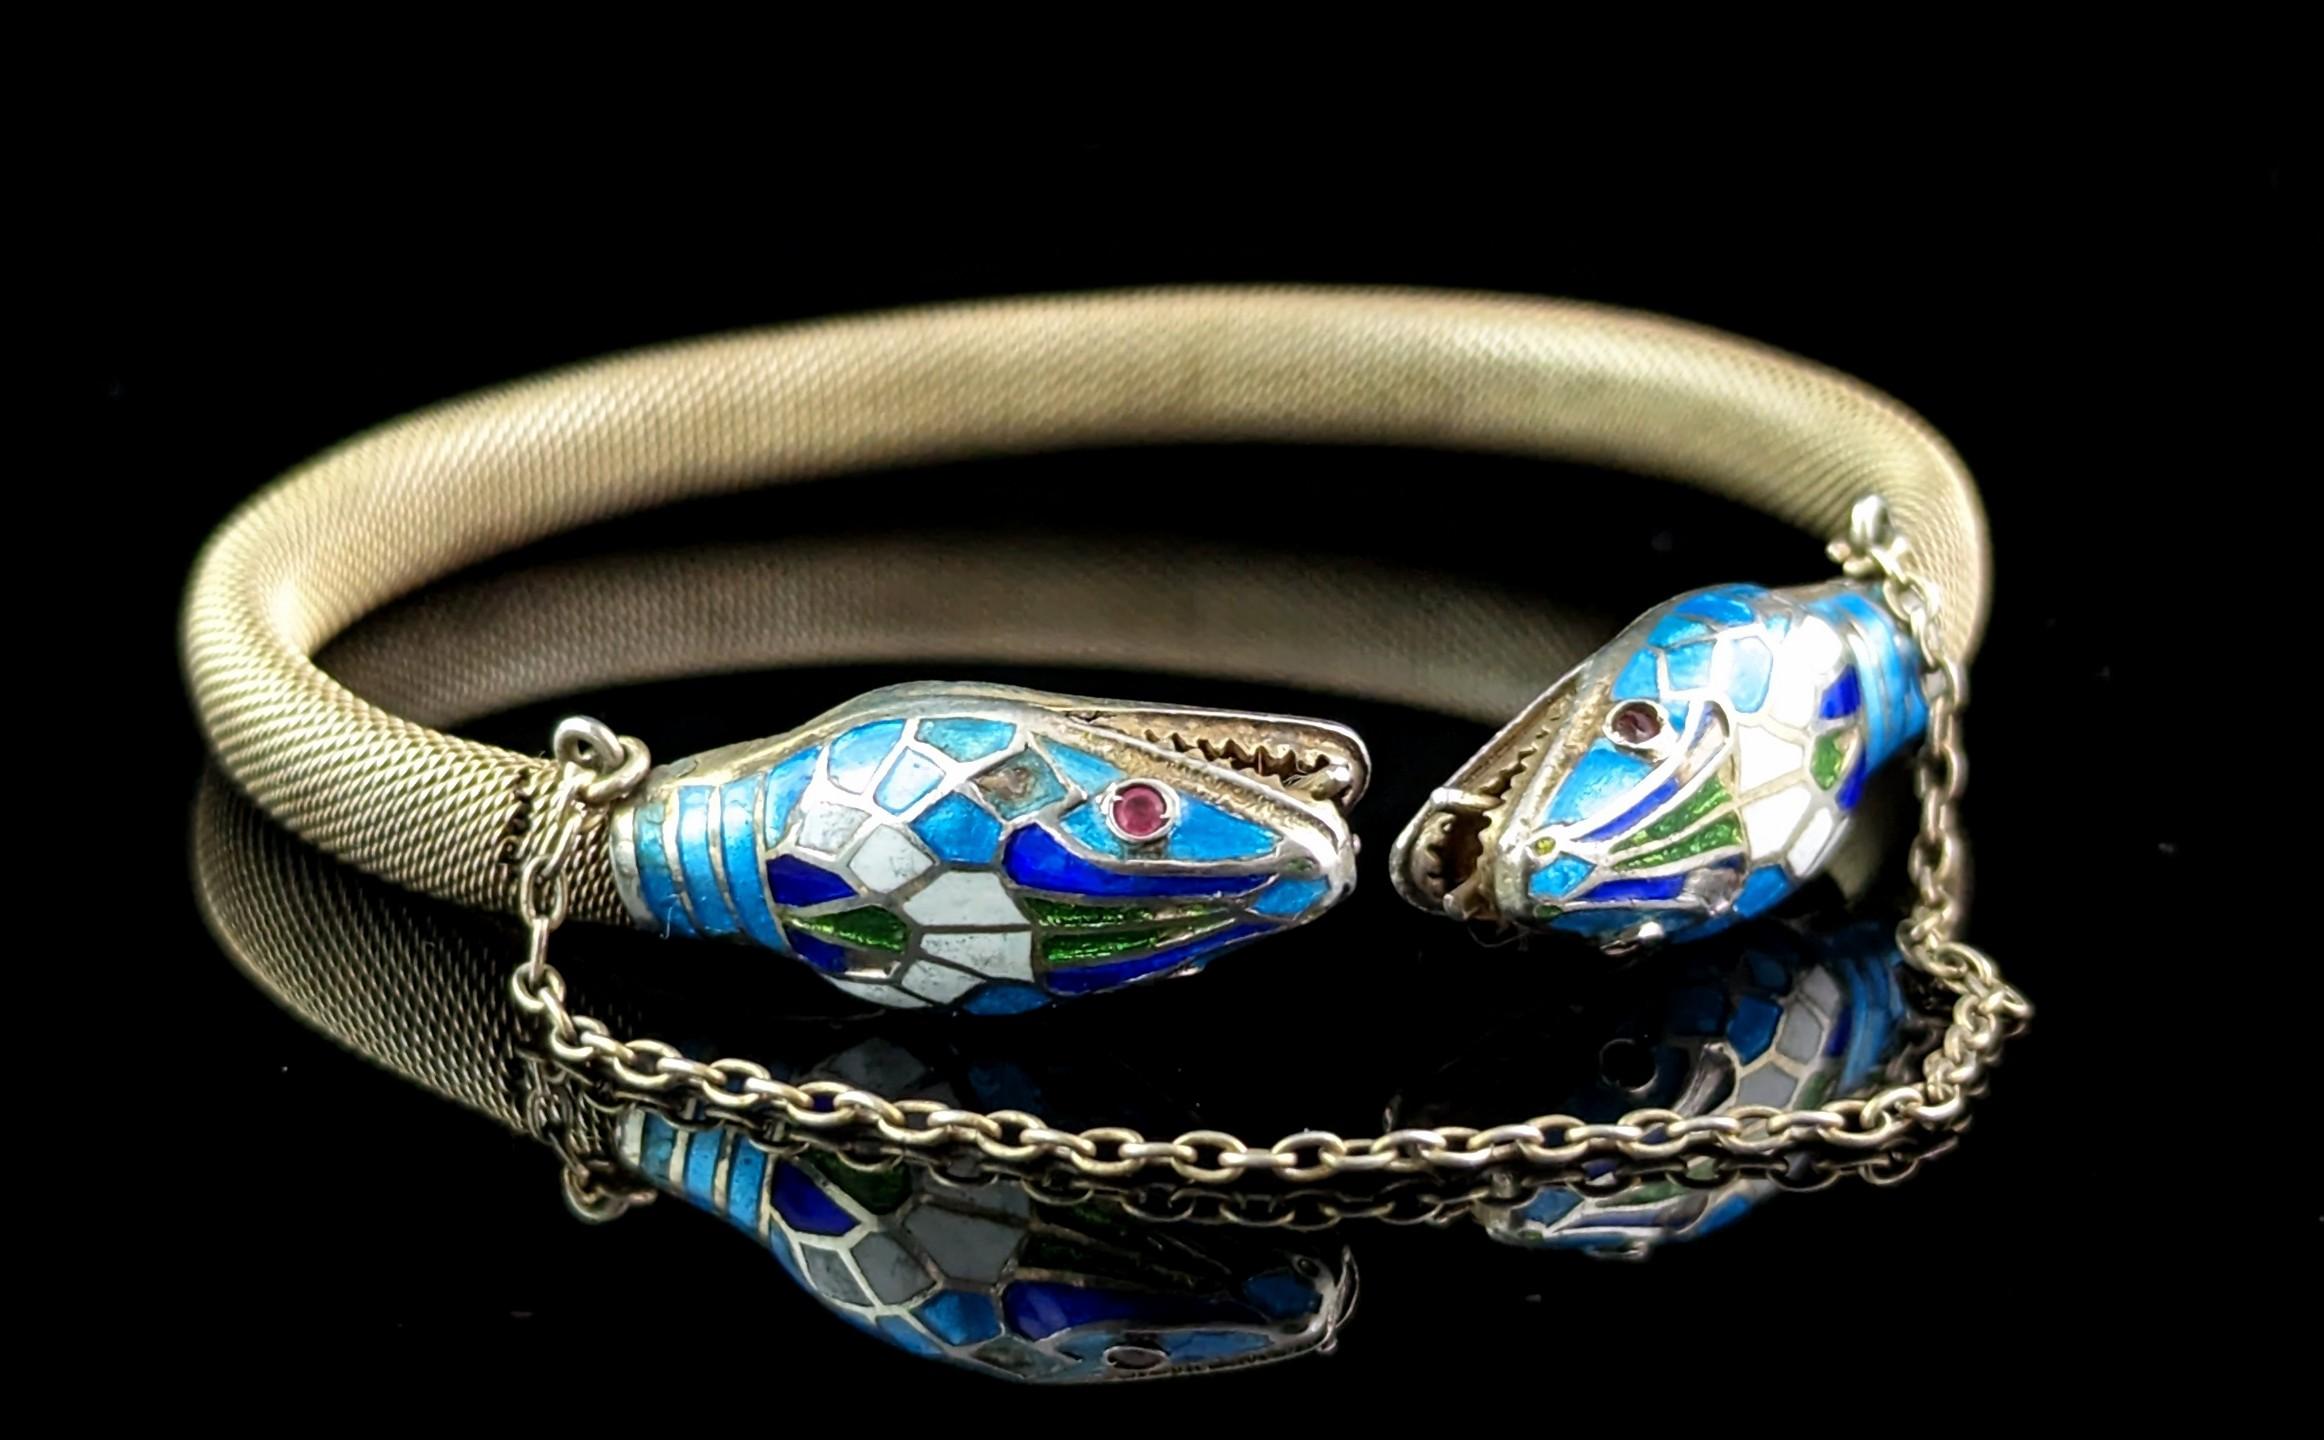 You can't help but be charmed by this truly amazing vintage double snake bangle.

Designed in the Egyptian revival manner it has decorative finials each designed as a snakes head, very well detailed and each is decorated with beautiful cloisonne